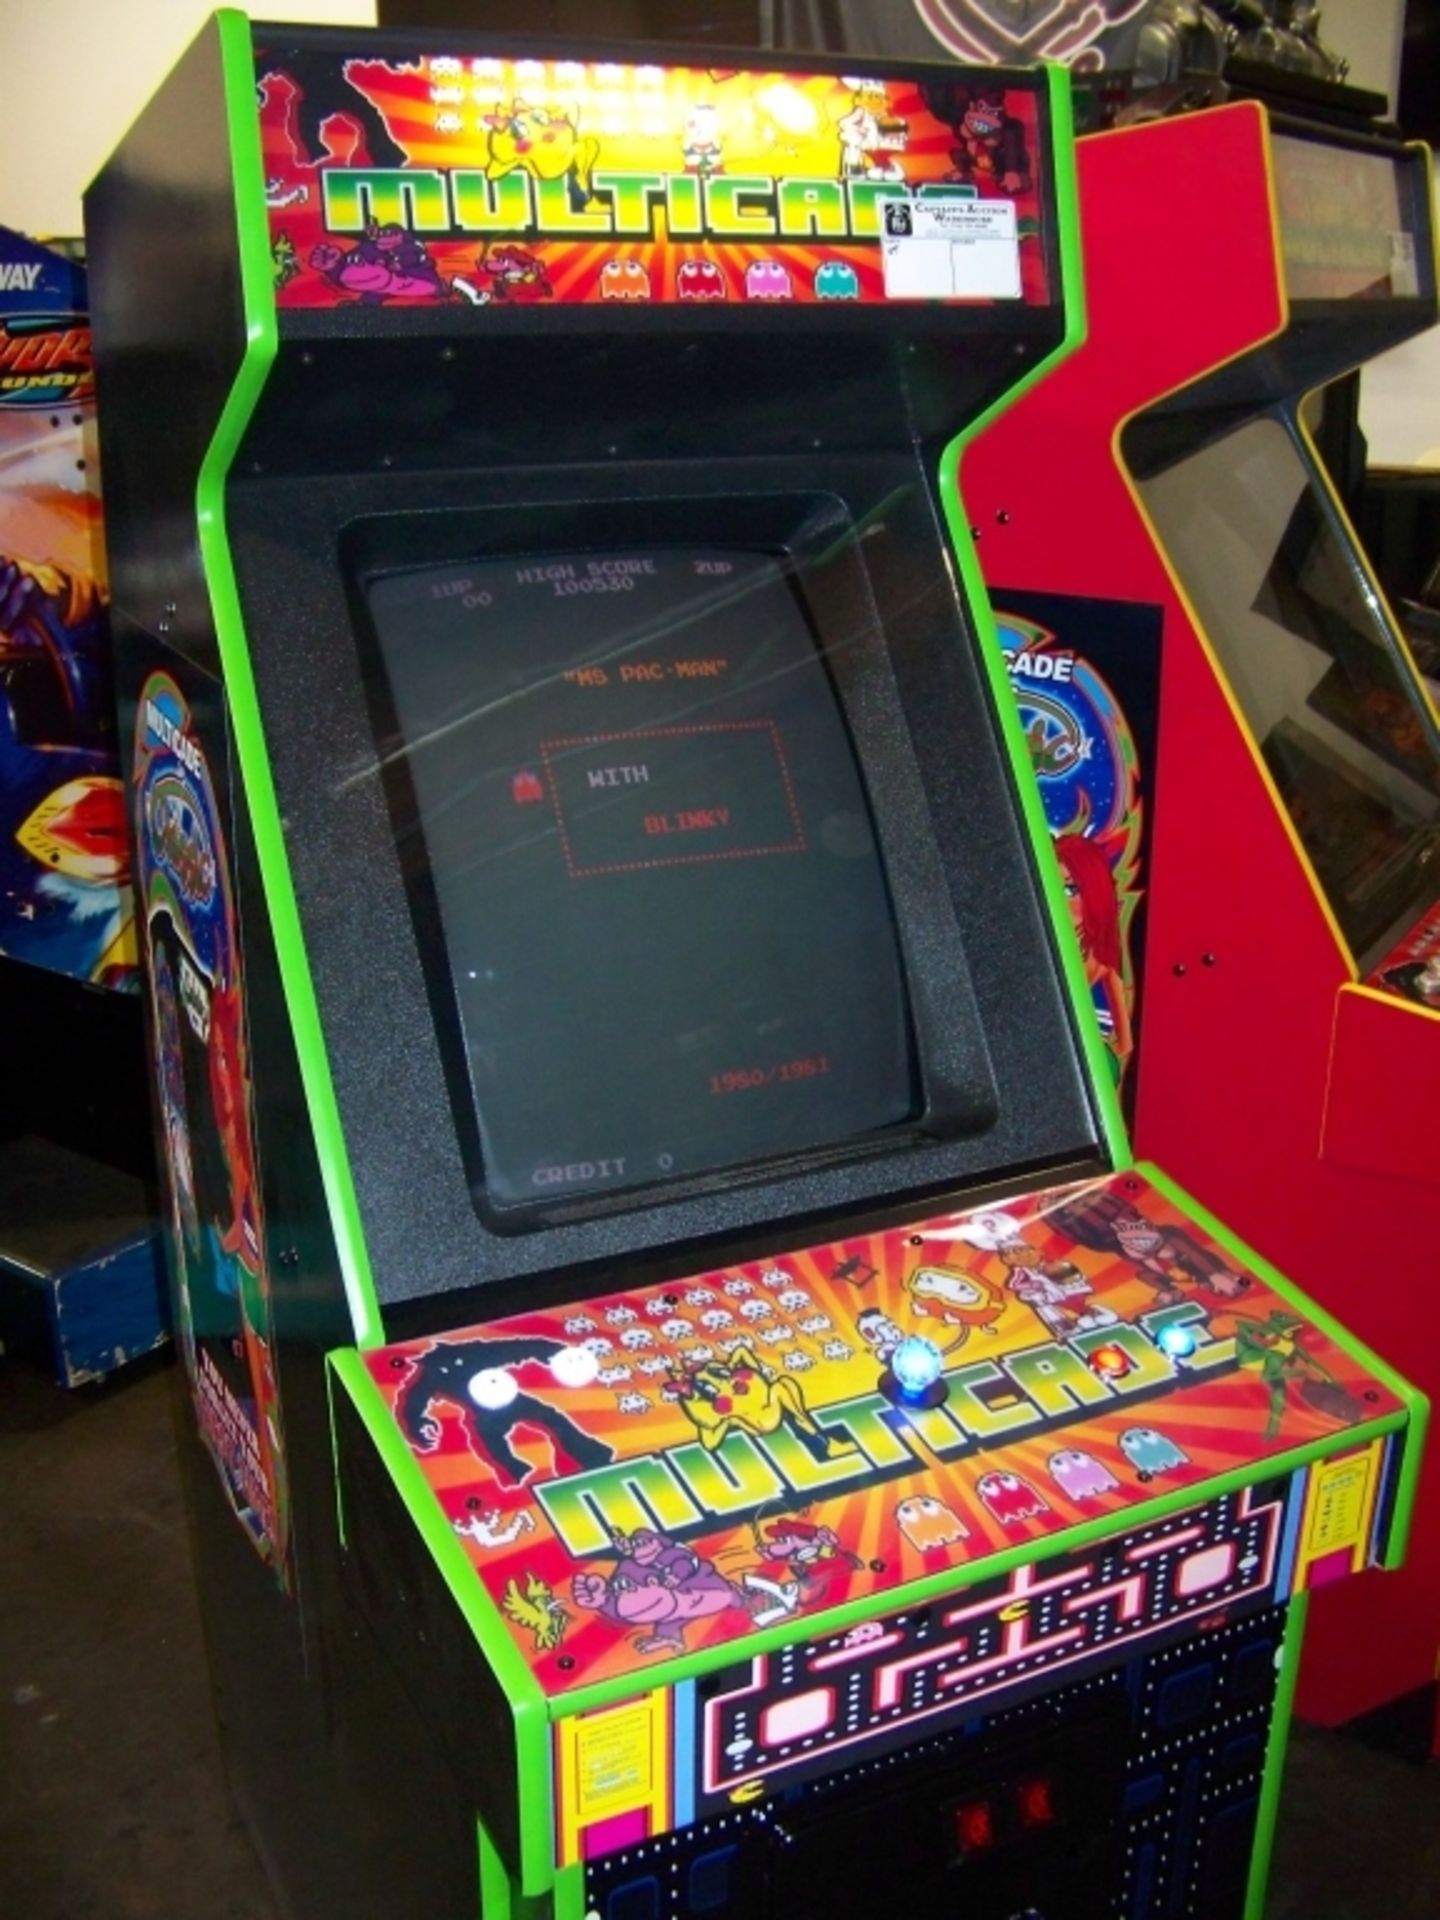 60 IN 1 MULTICADE UPRIGHT ARCADE GAME Item is in used condition. Evidence of wear and commercial - Image 3 of 7